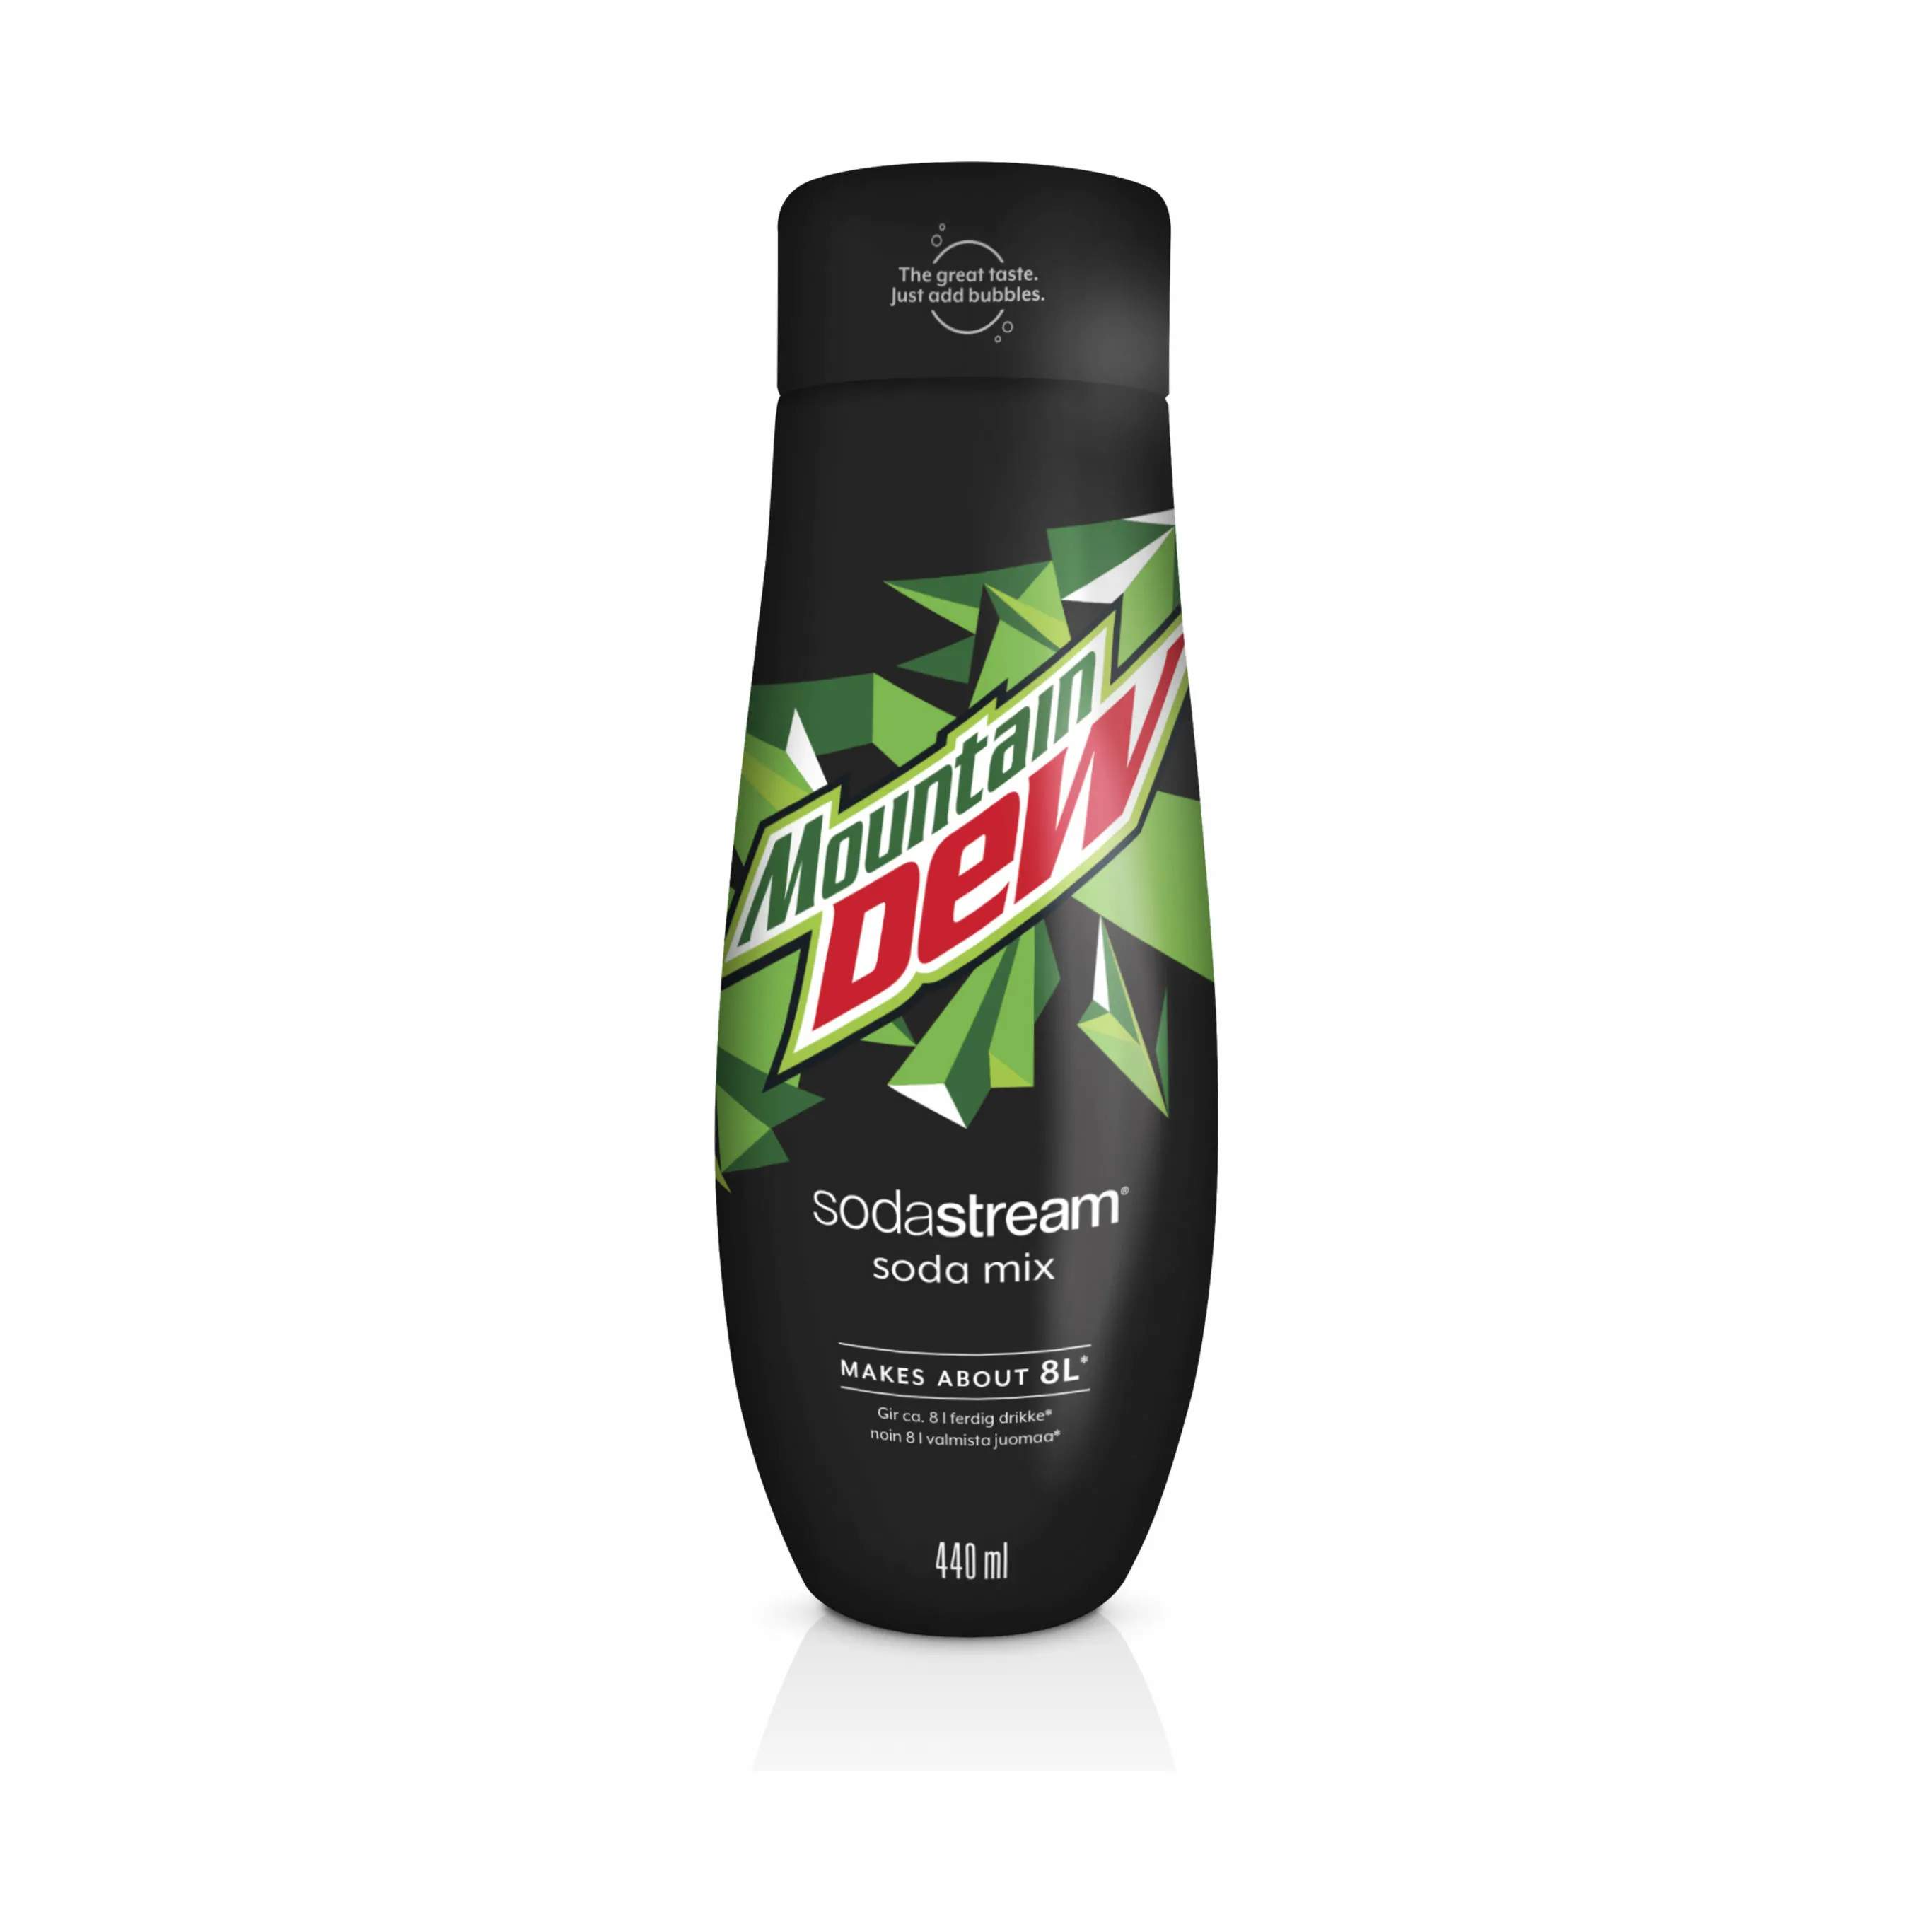 SodaStream smagskoncentrater Sirup - Mountain Dew